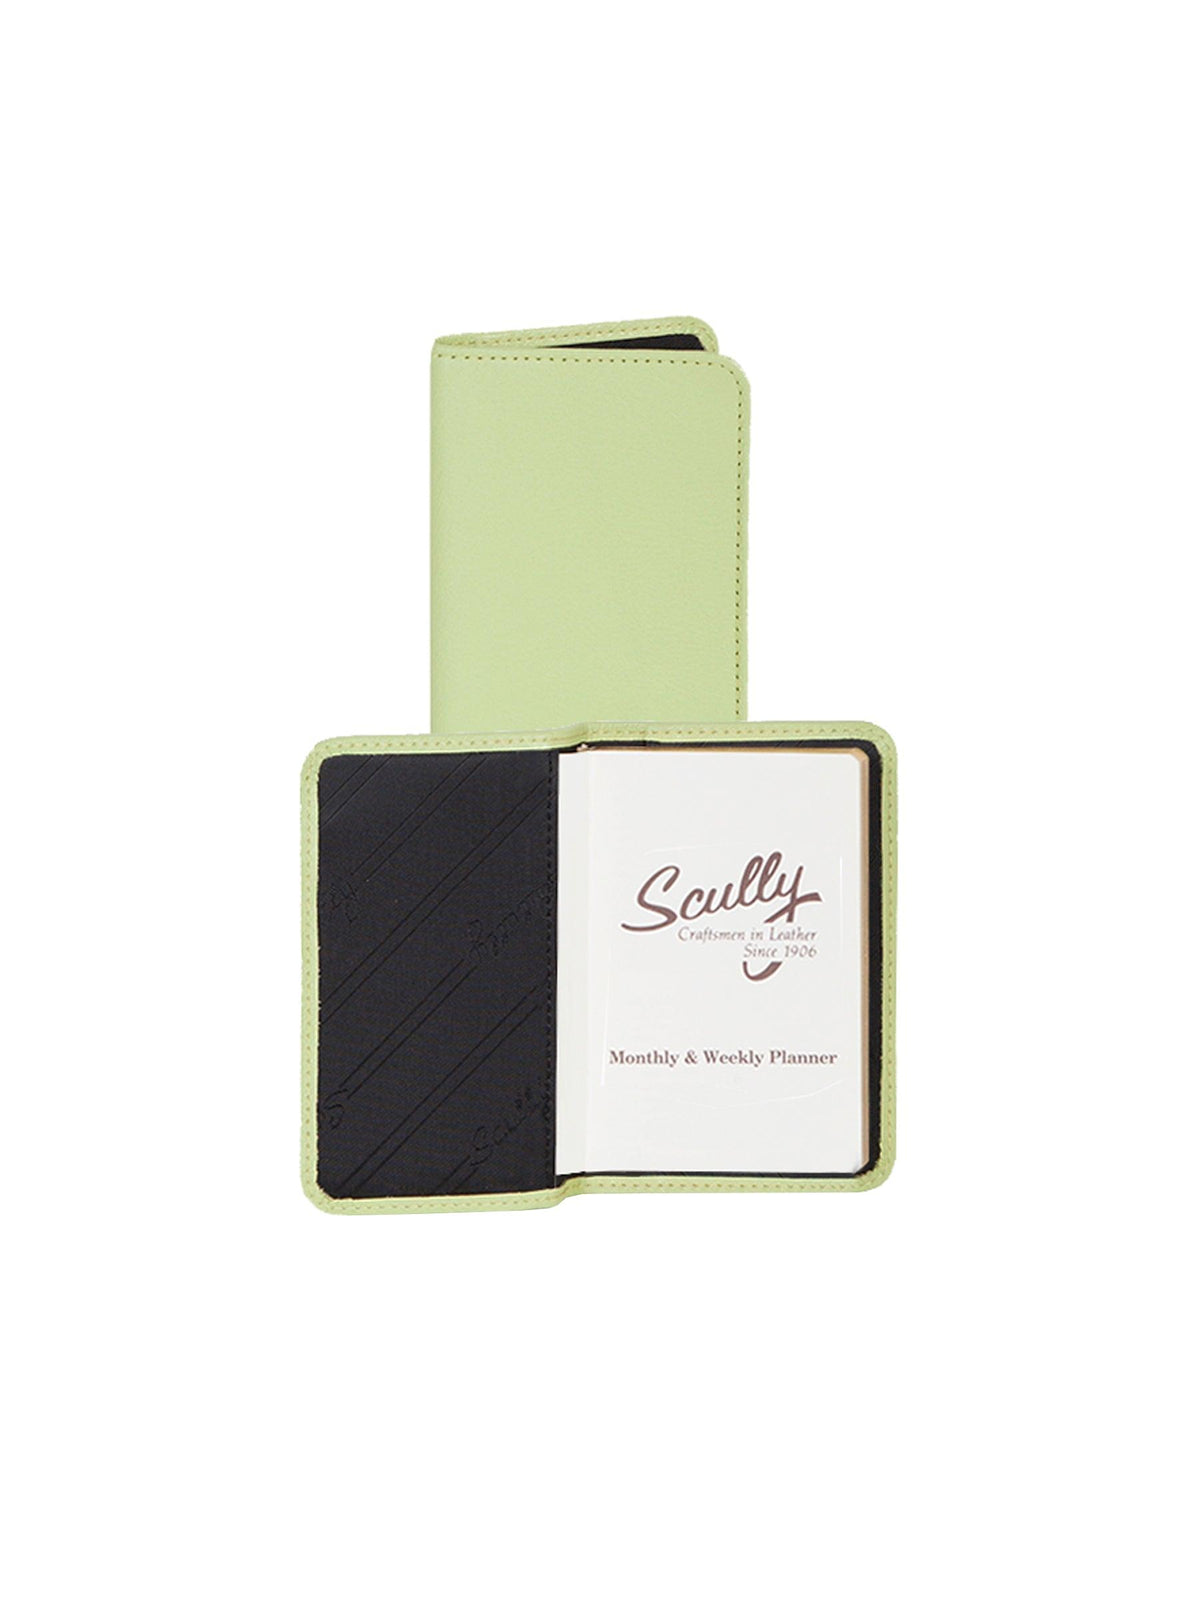 Scully MINT BLANK PERSONAL NOTER - Flyclothing LLC